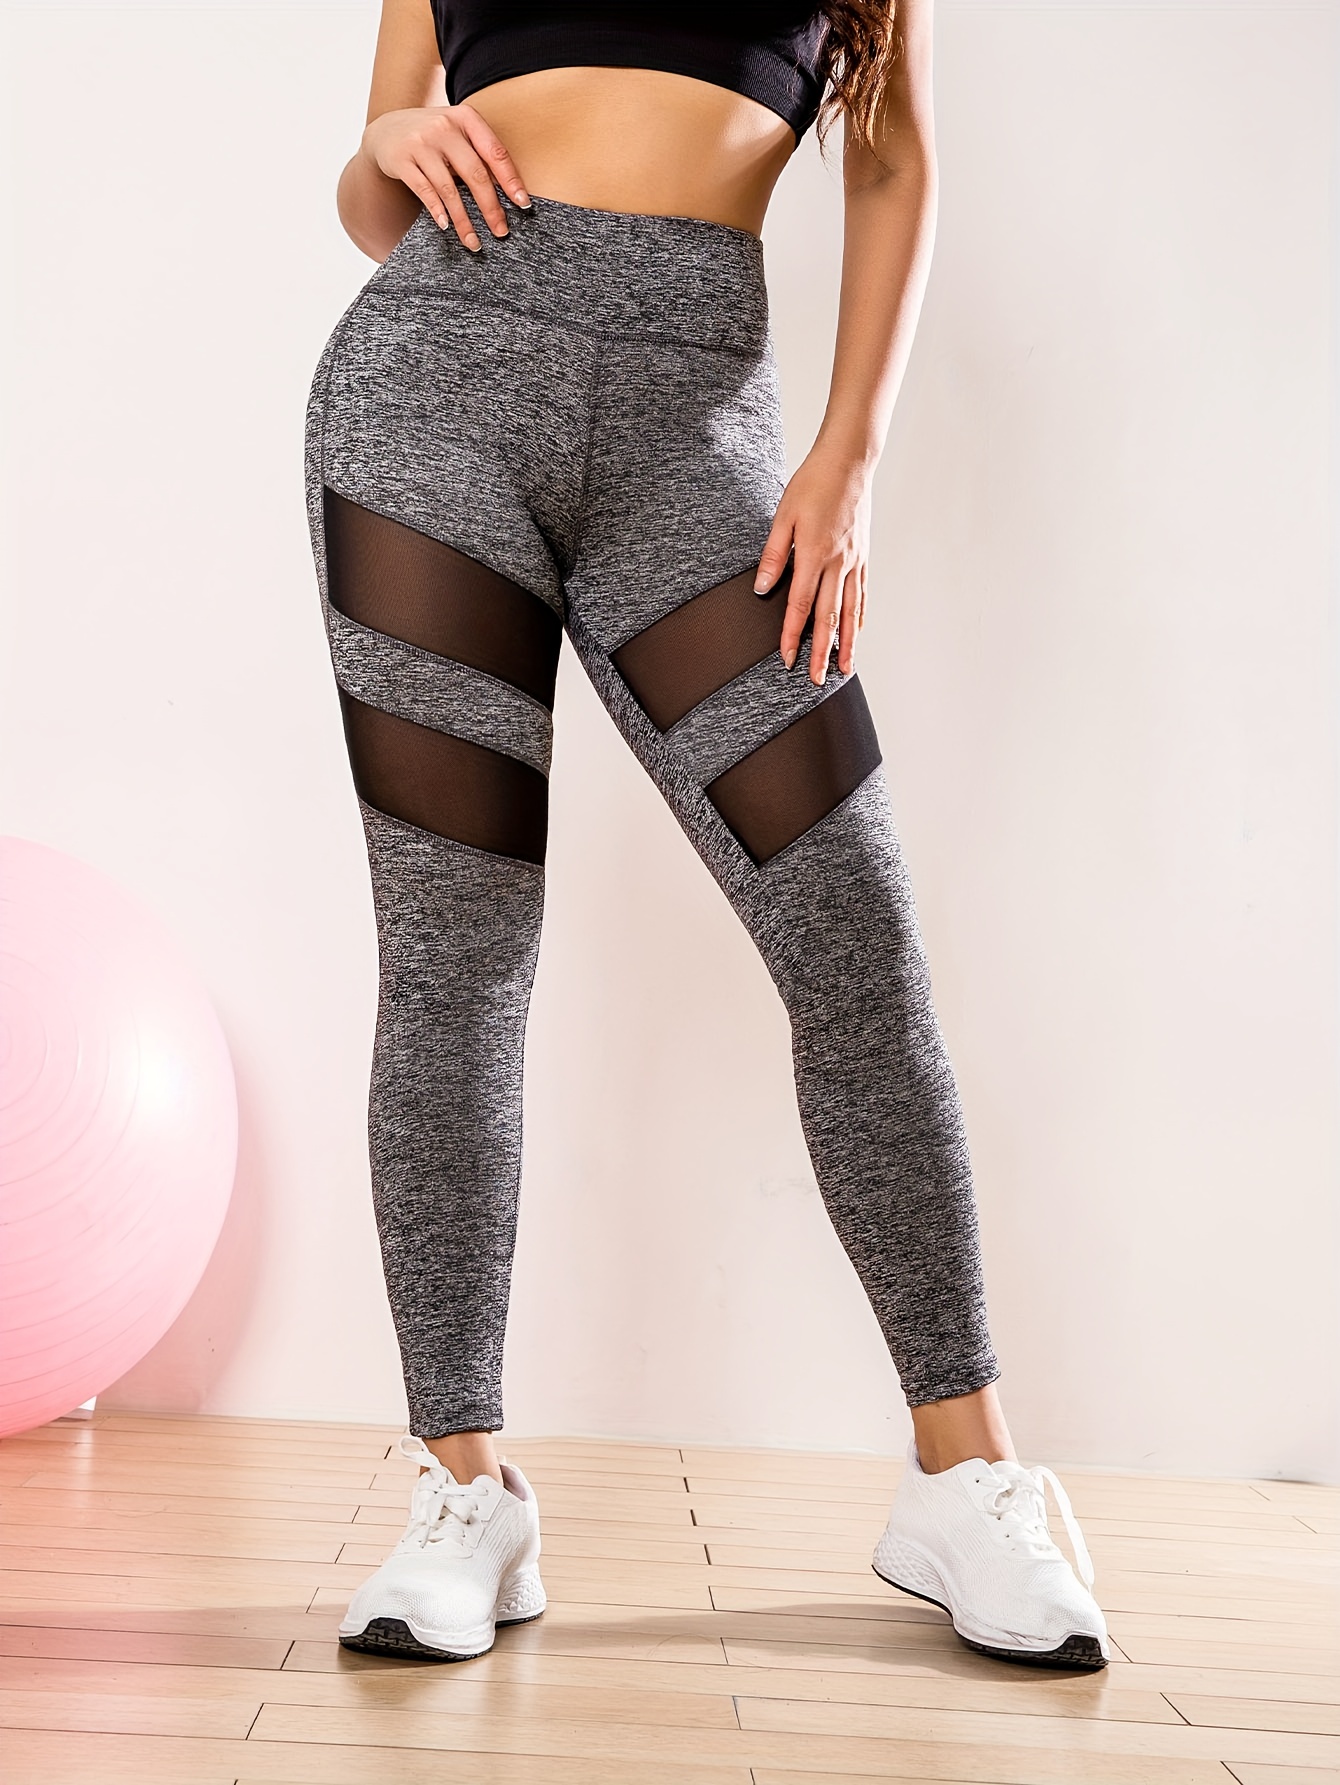 Mesh Contrast High Waist Stretchy Sports Tight Pants, Slimming Yoga Fitness  Workout Gym Exercise Leggings, Women's Activewear